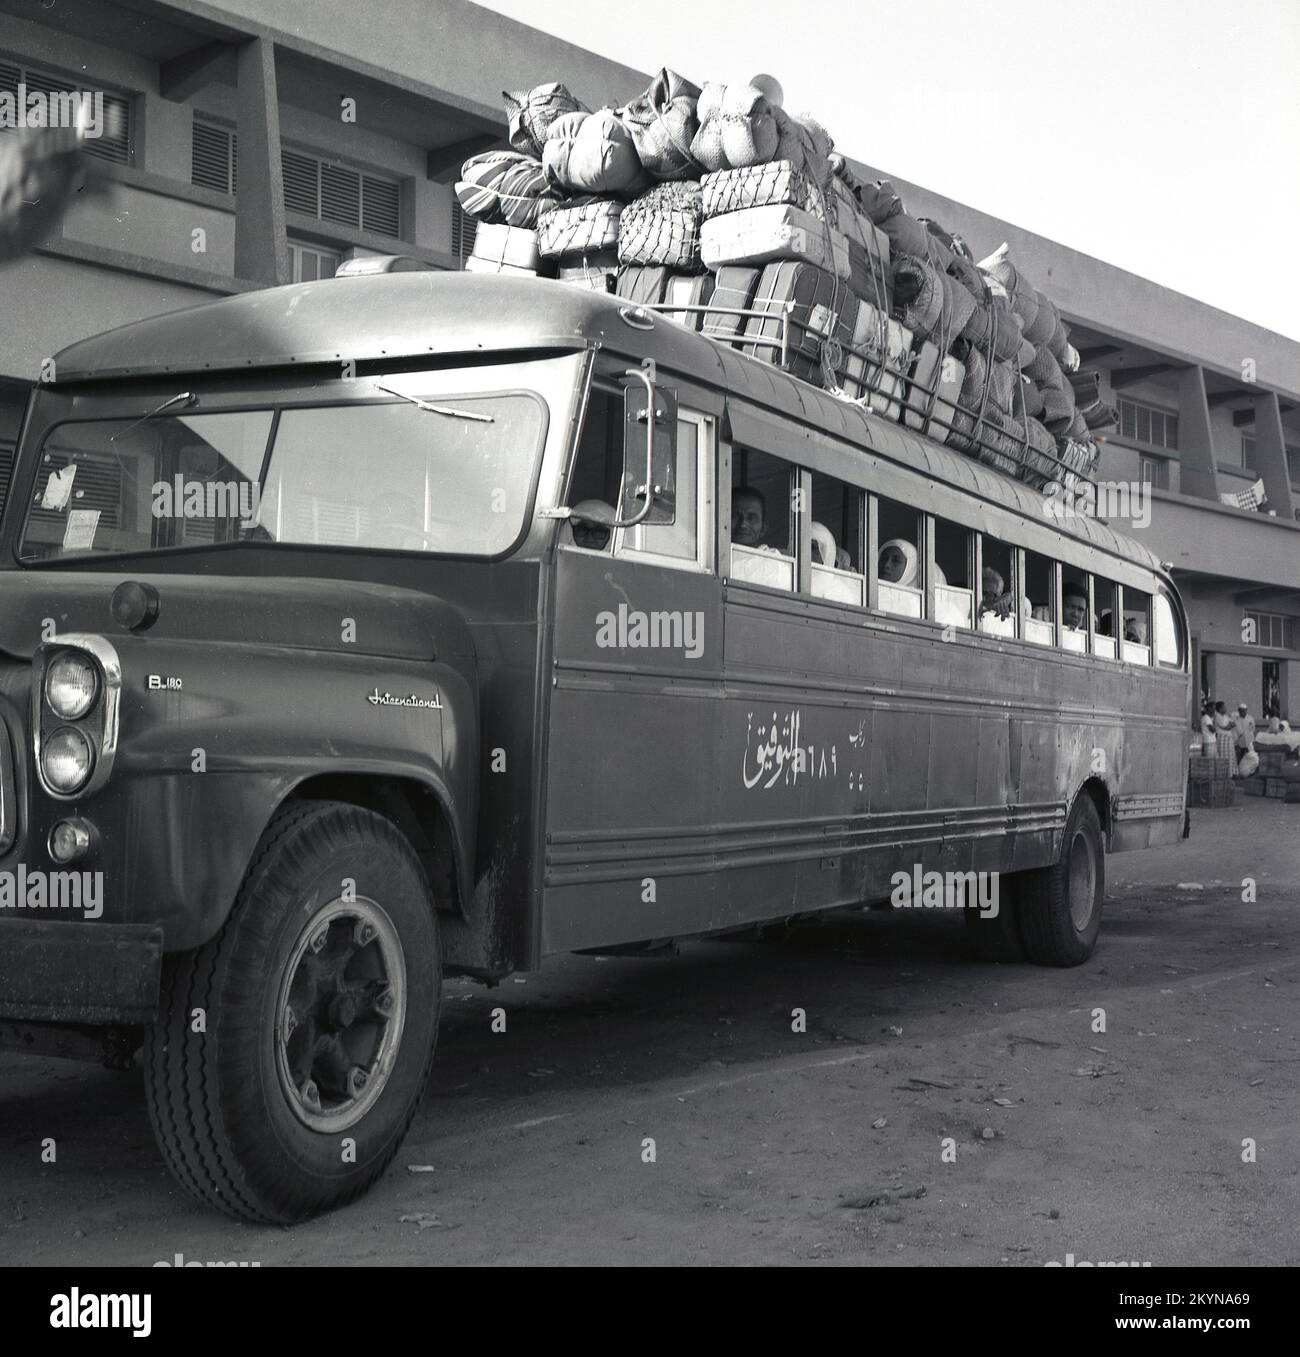 1960s, historical, parked outside an imported American International Harvester B series bus, with passengers sitting inside and a large amounf of luggage and cargo loaded on the roof, tied down with string, Riyadh, Saudi Arabia. Stock Photo